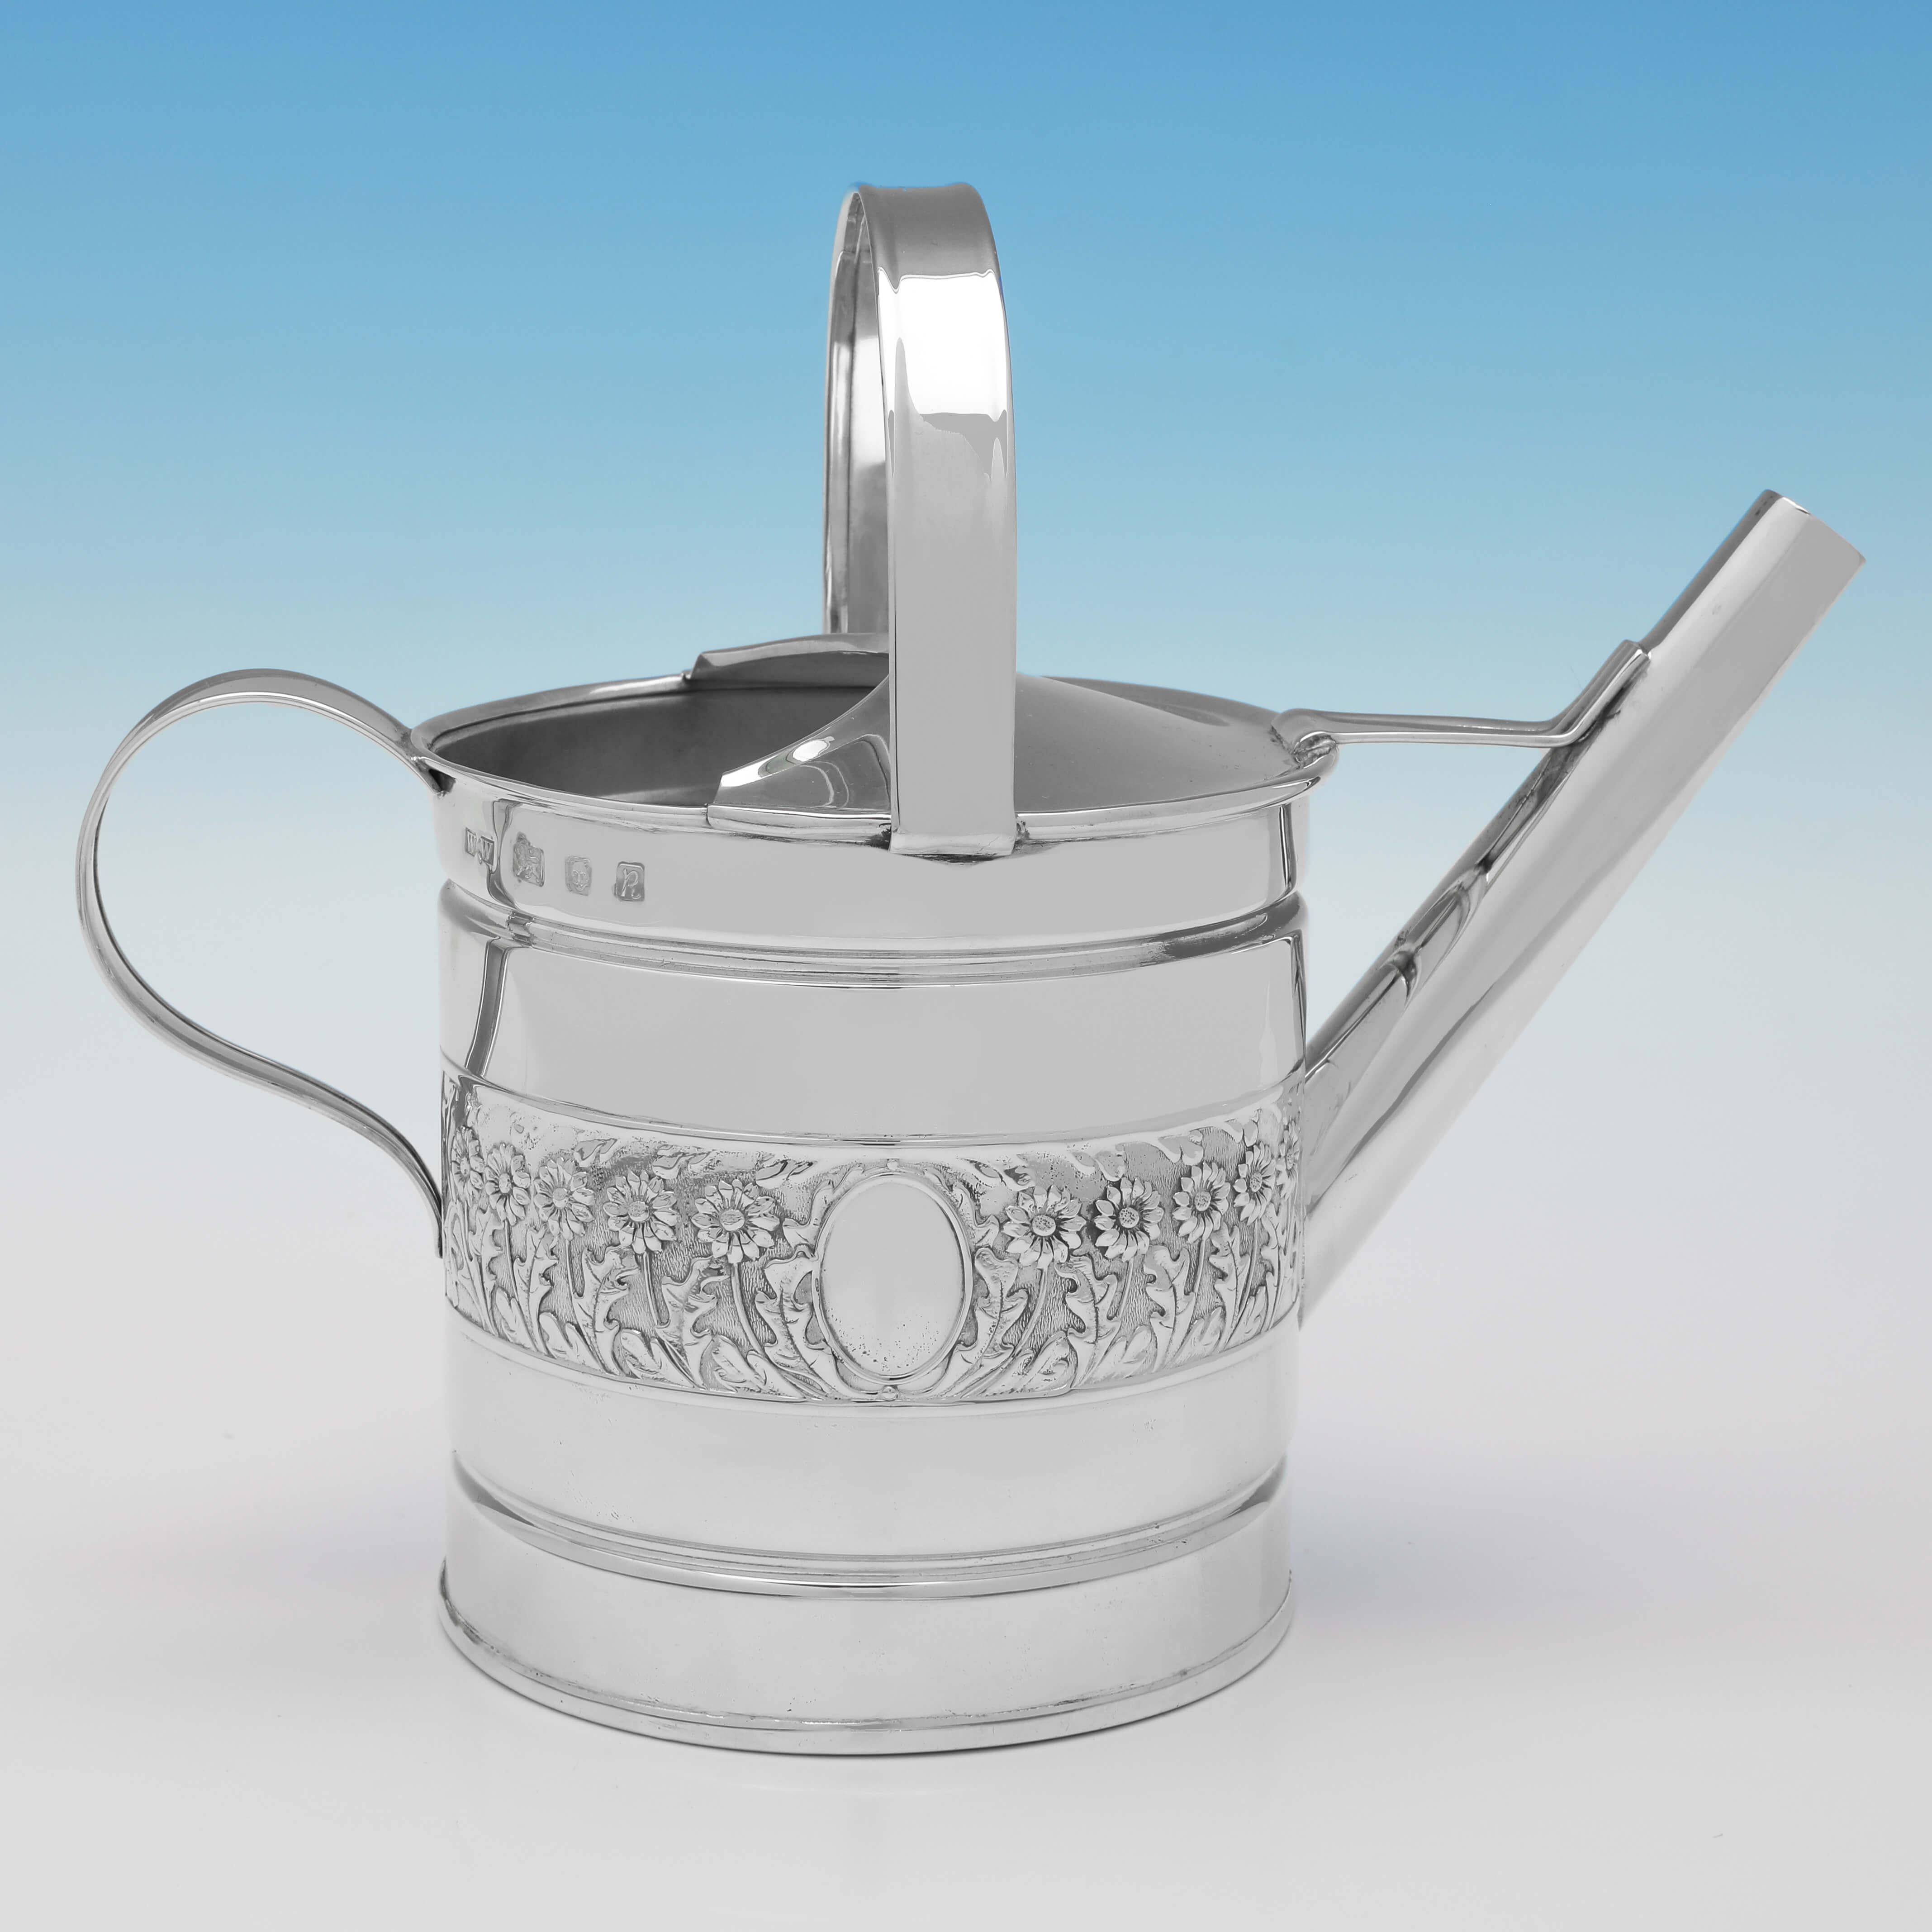 Hallmarked in London in 1991 by Whitehill Silver & Plate Company, this attractive, Sterling Silver Watering Can, would make an ideal piece for any gardening enthusiast. The watering can measures 7.25